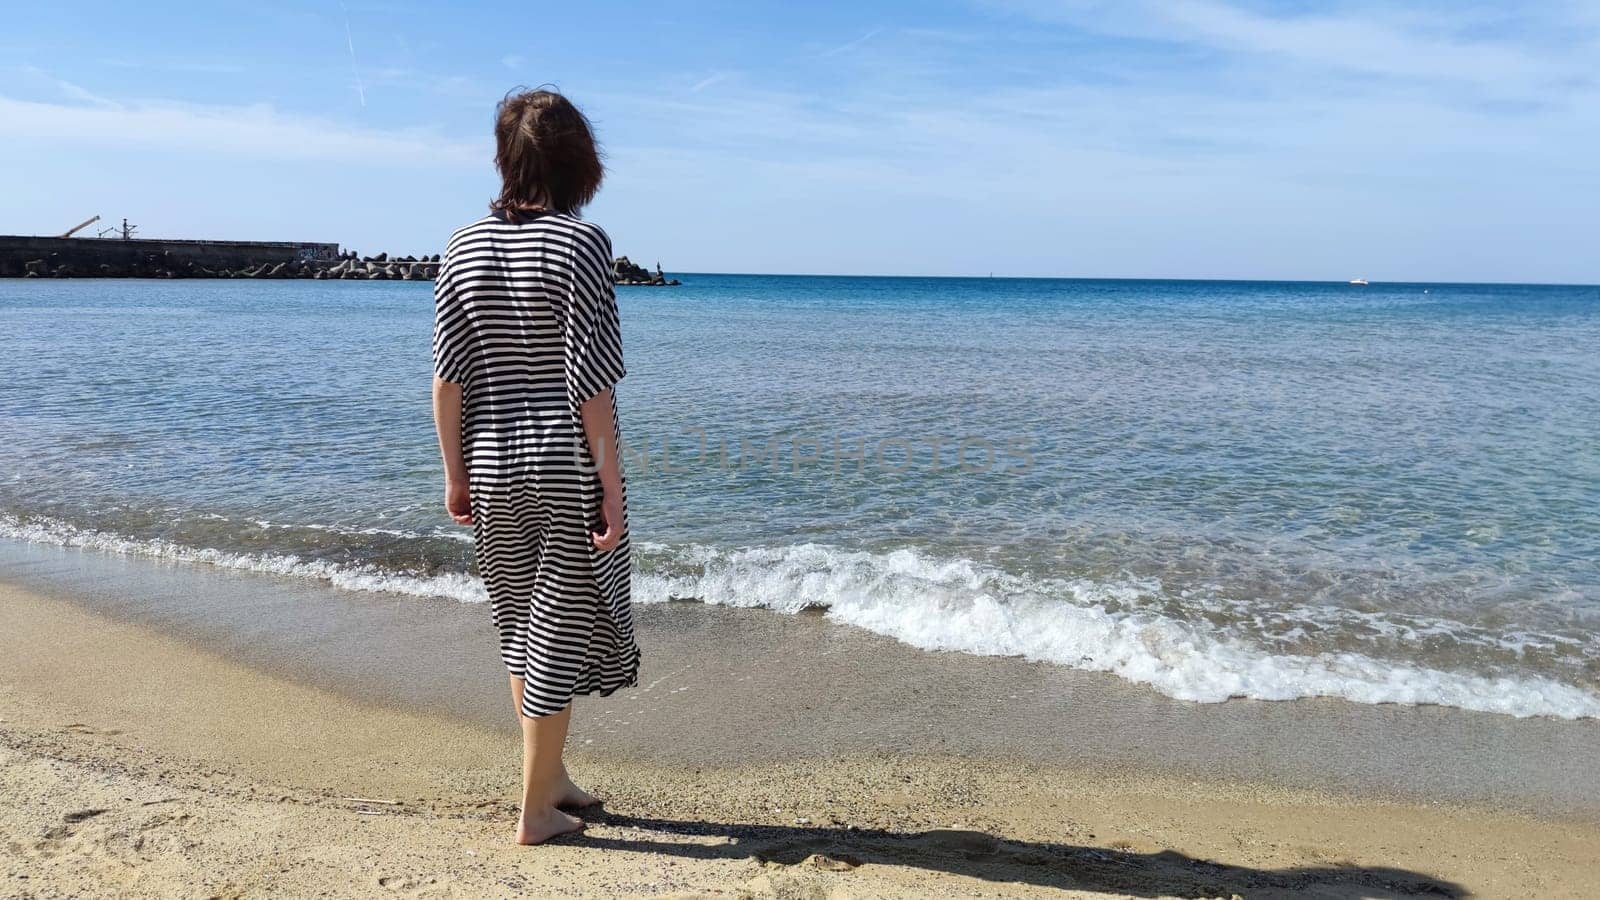 Barefoot teenage girl in a striped dress on the seashore on a sunny day, rear view